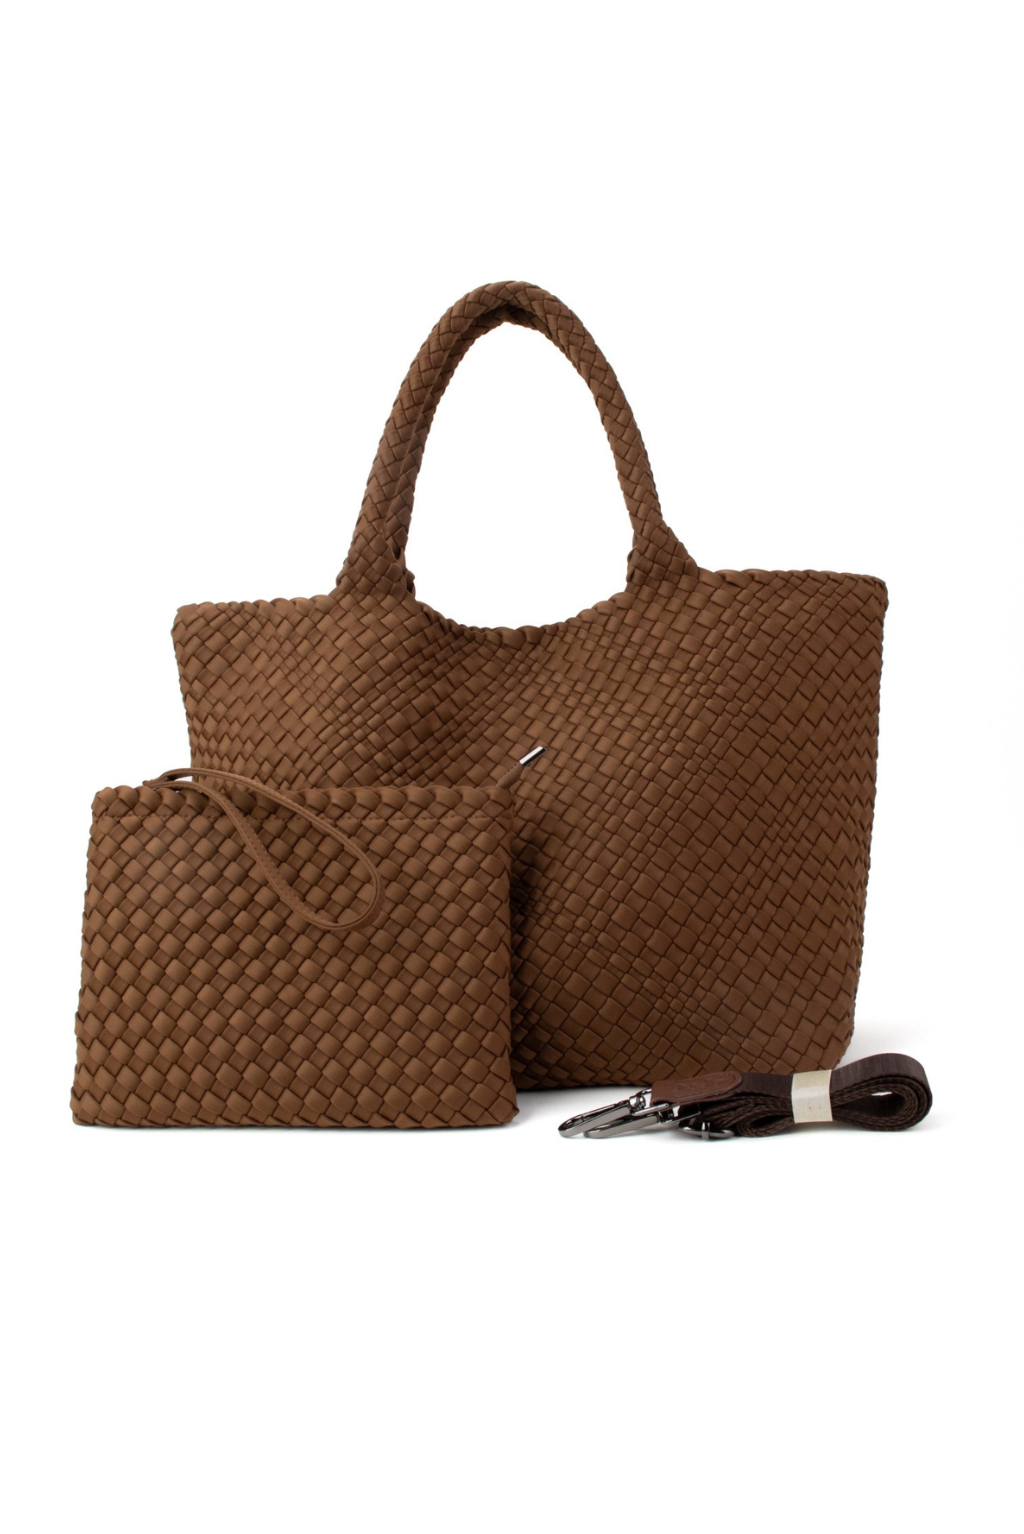 Brown Woven Tote with Strap -Pre Order